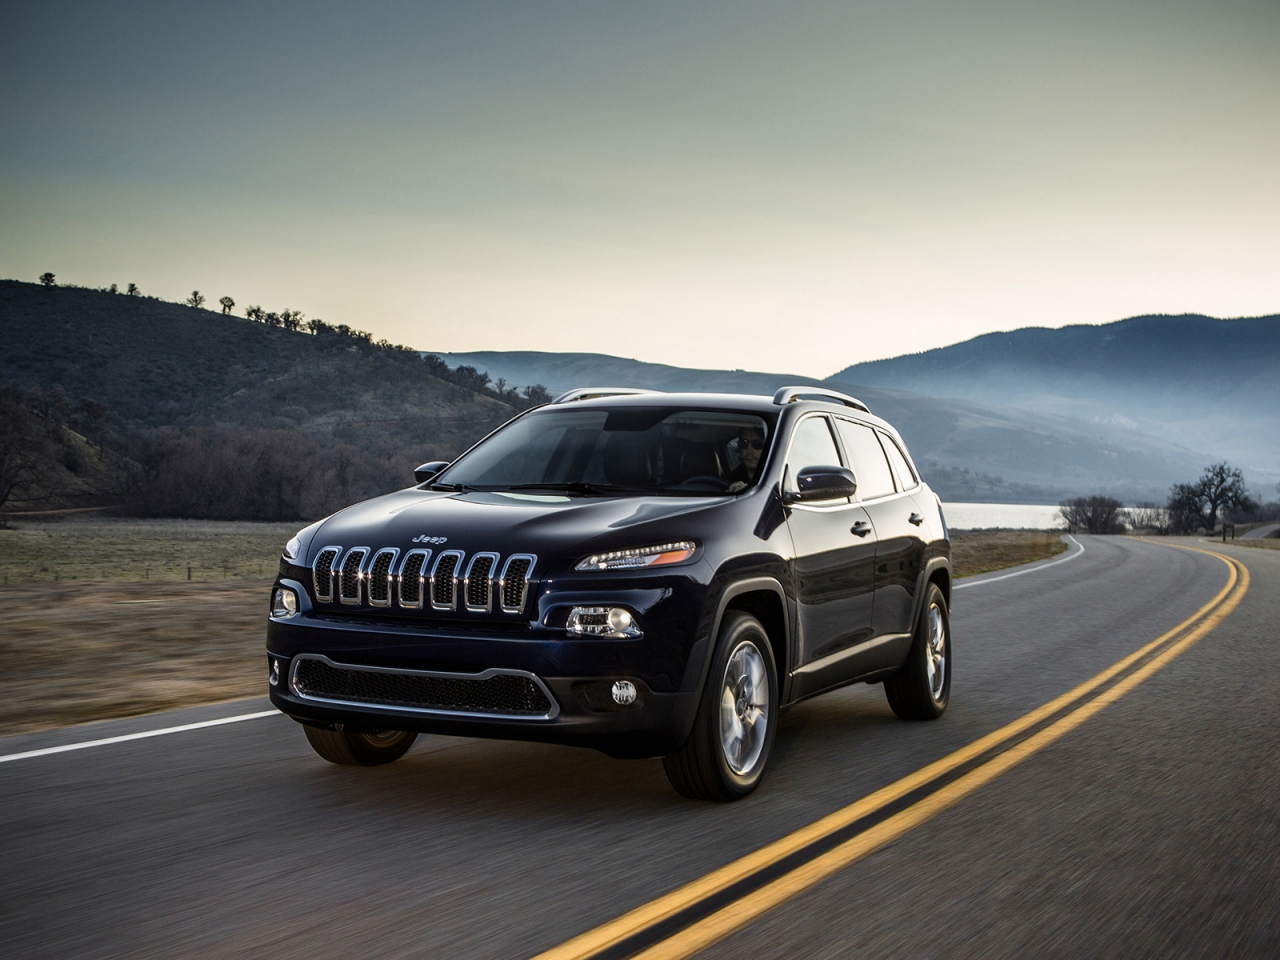 Jeep Cherokee 2014 Edition for 1280 x 960 resolution